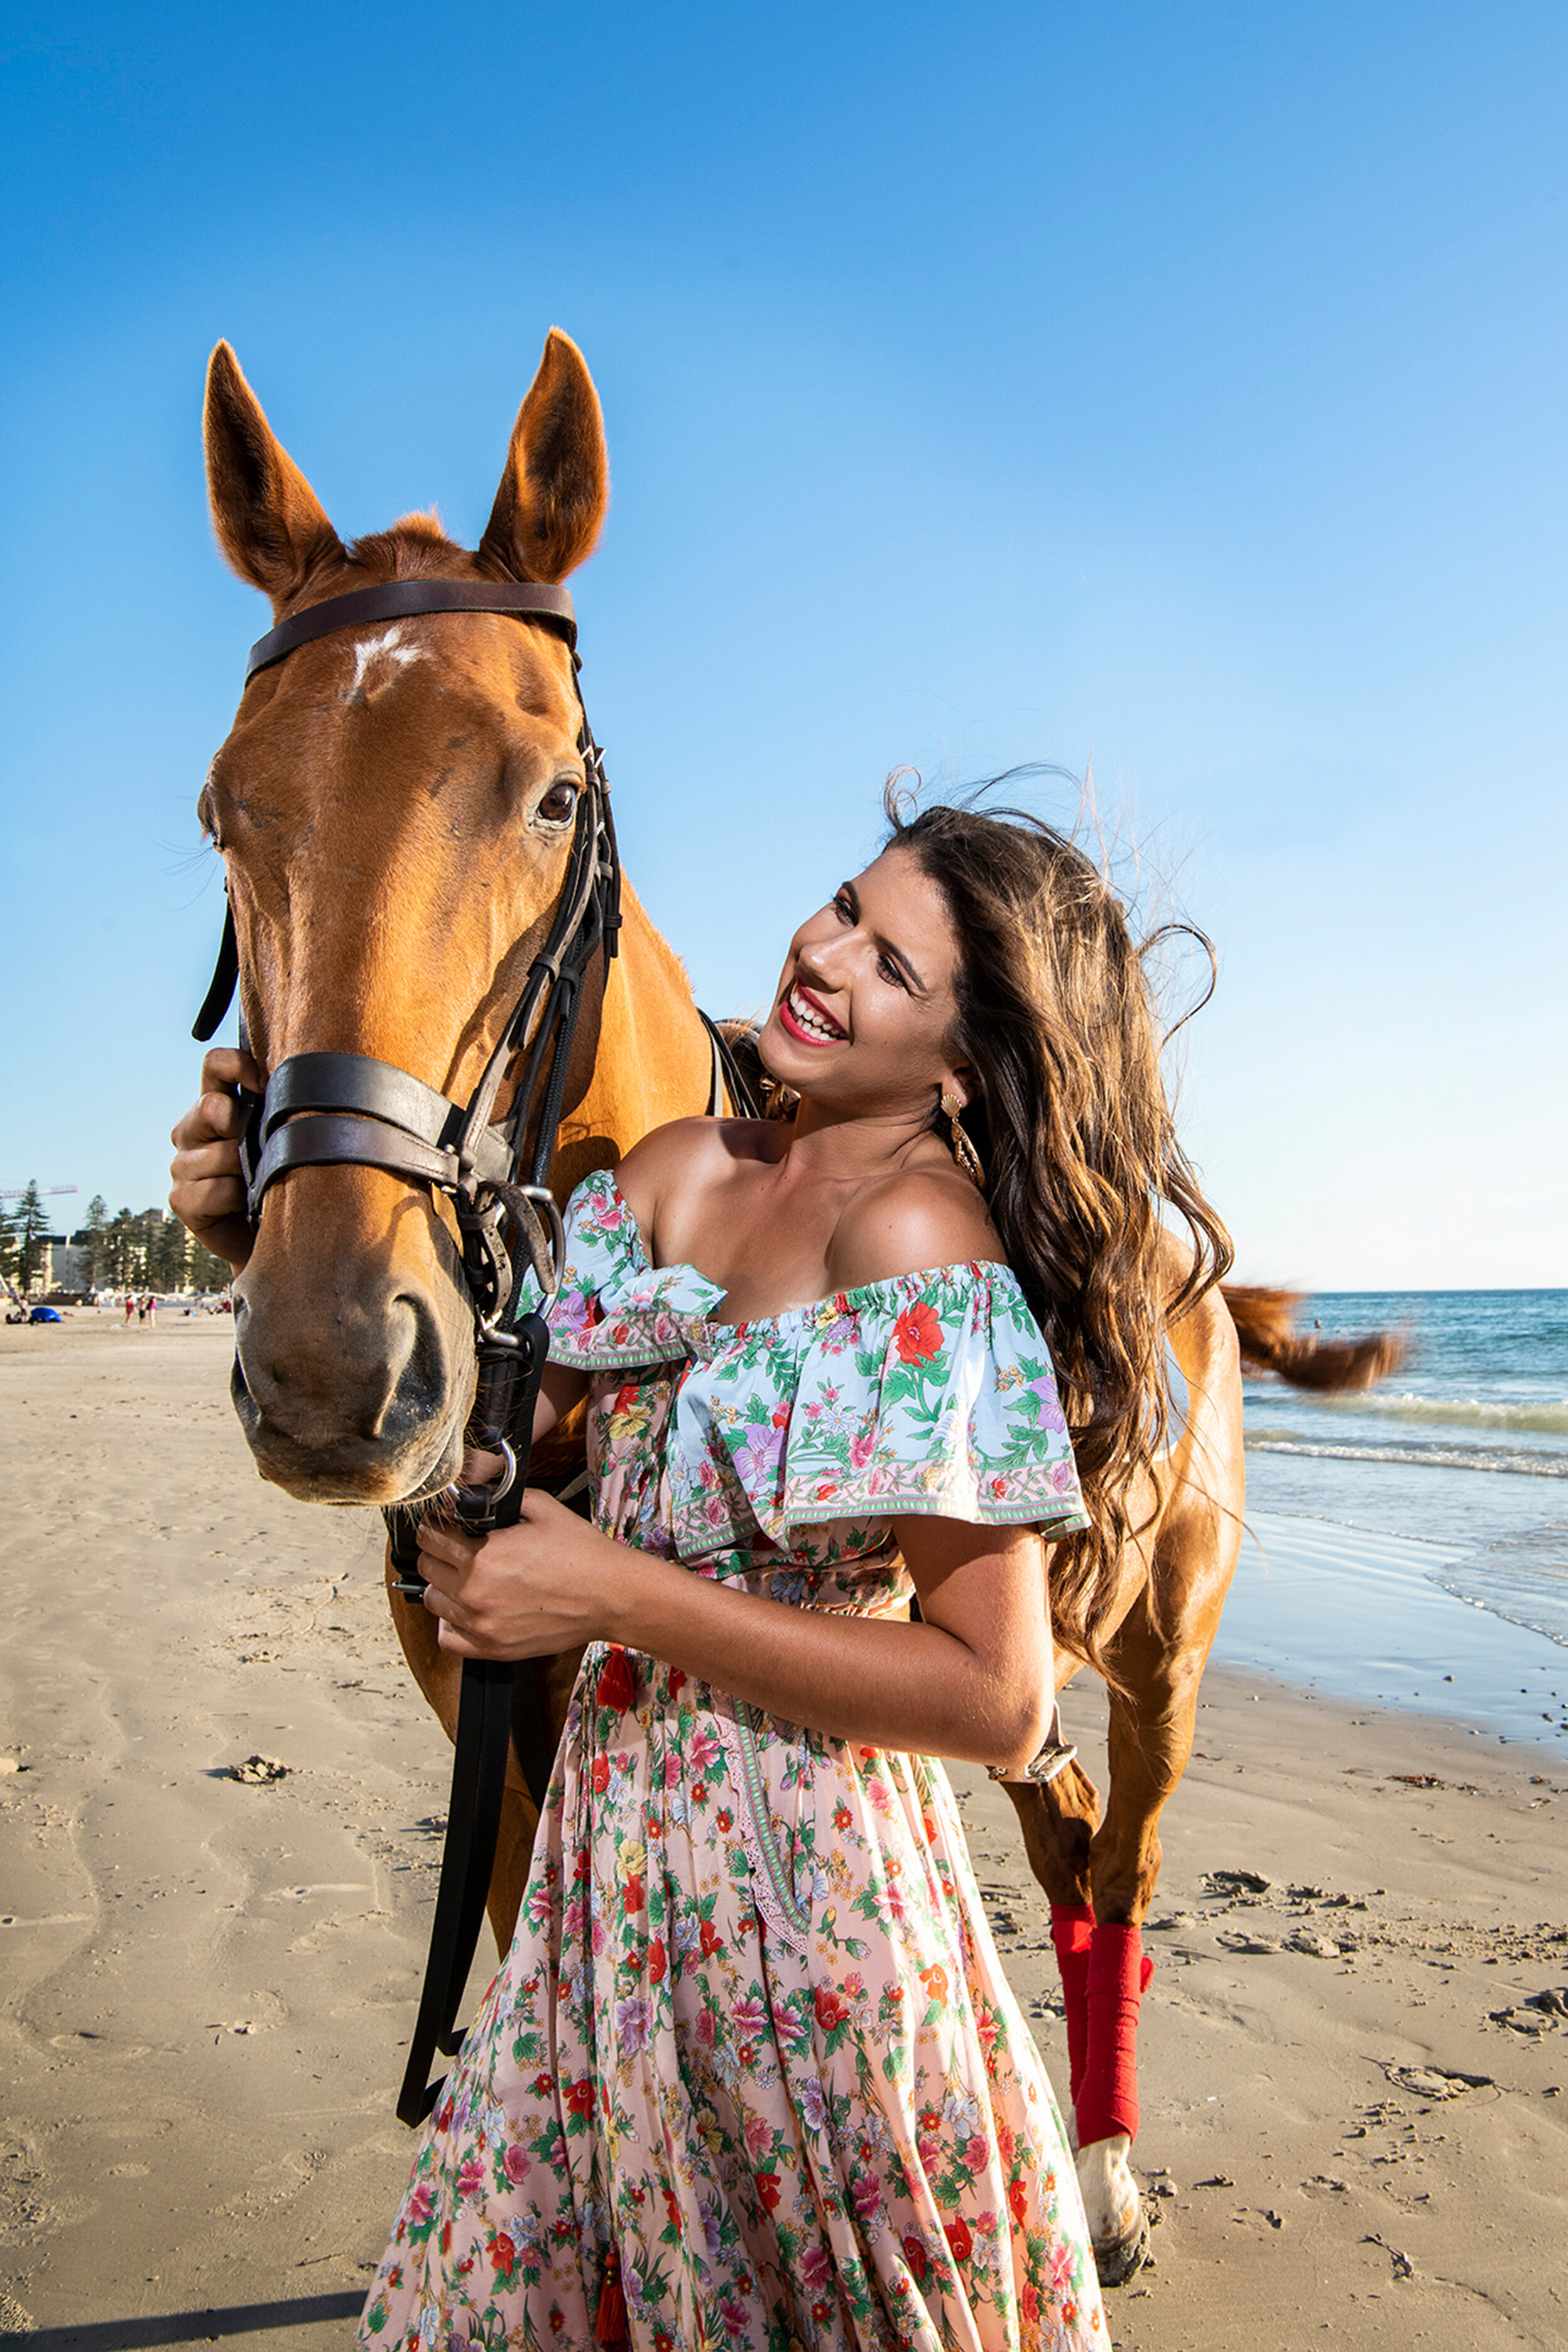  23.1.19 - Model Paloma Ridley with 'Archie' at Glenelg Beach, ahead of the Beach Polo event. (The Advertiser, News Corp Australia)  